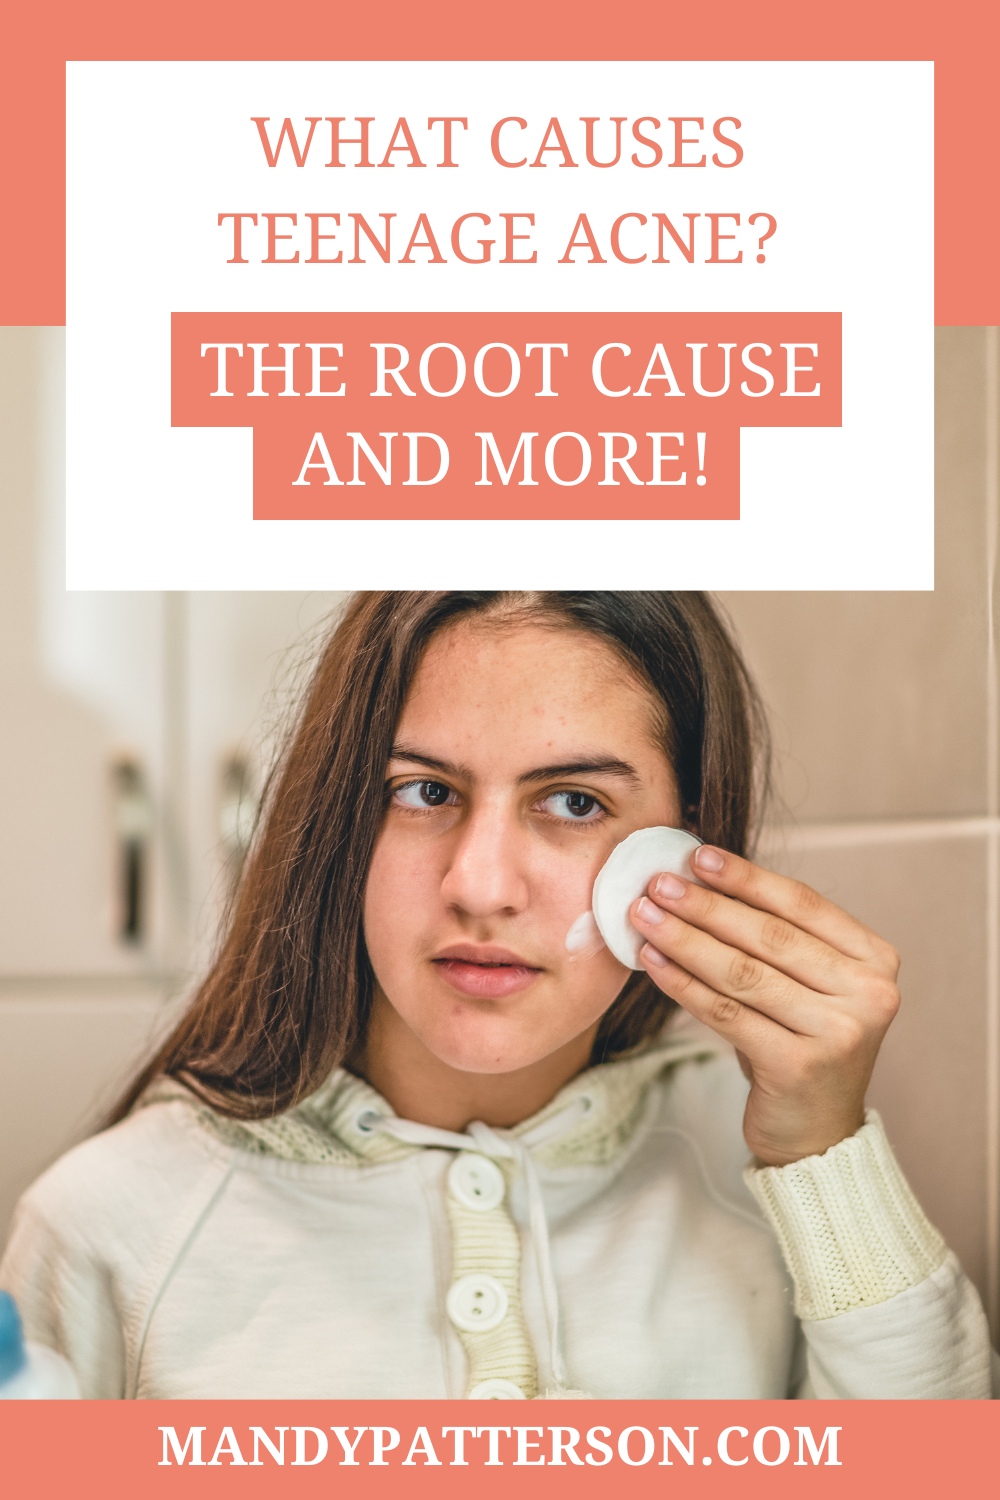 What Causes Teenage Acne? The Root Cause and More!